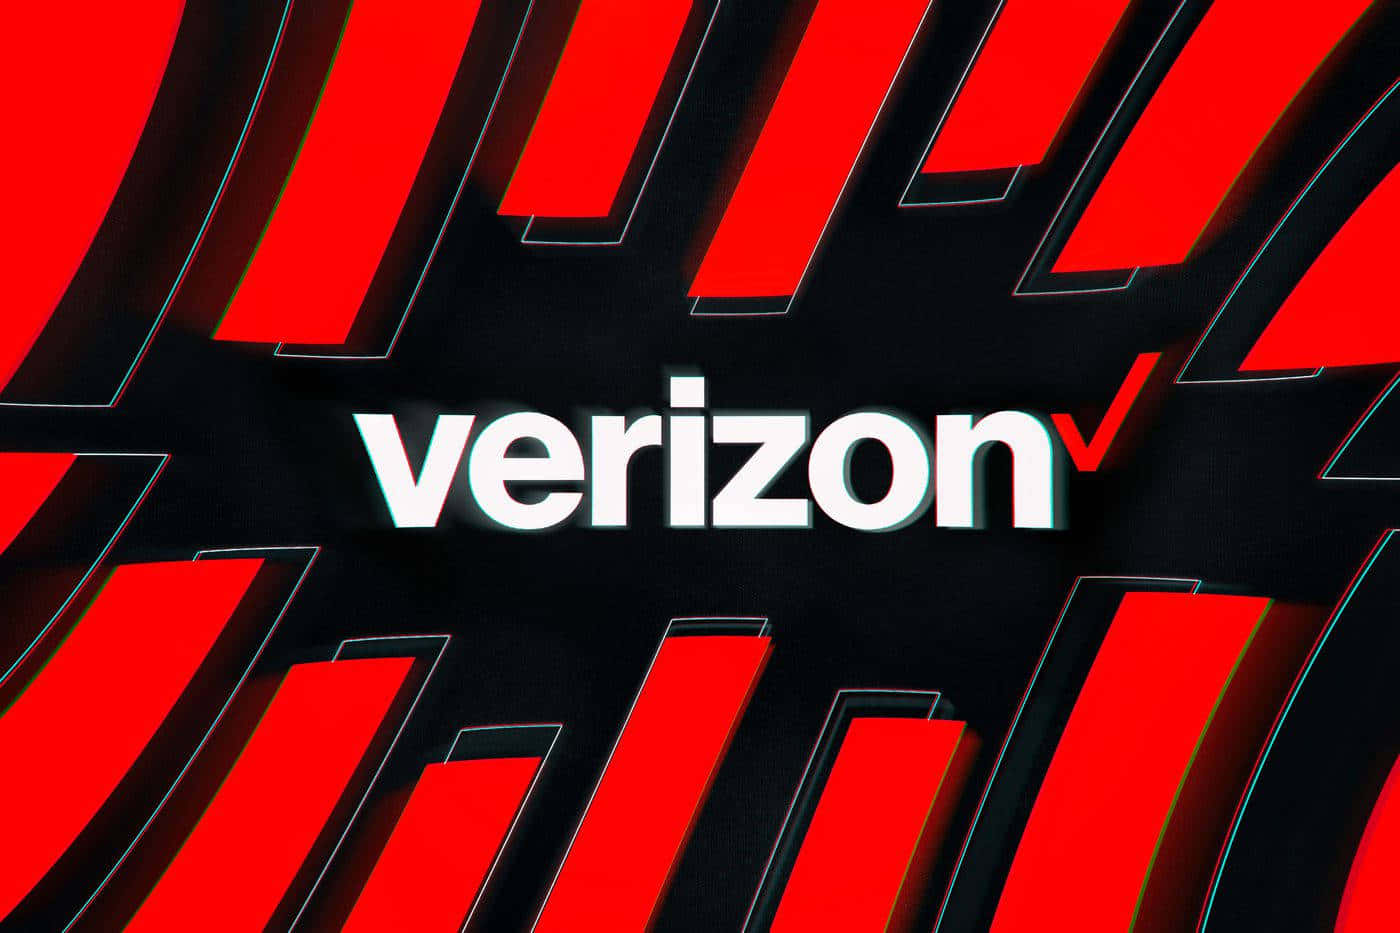 Now is the time to upgrade with Verizon!